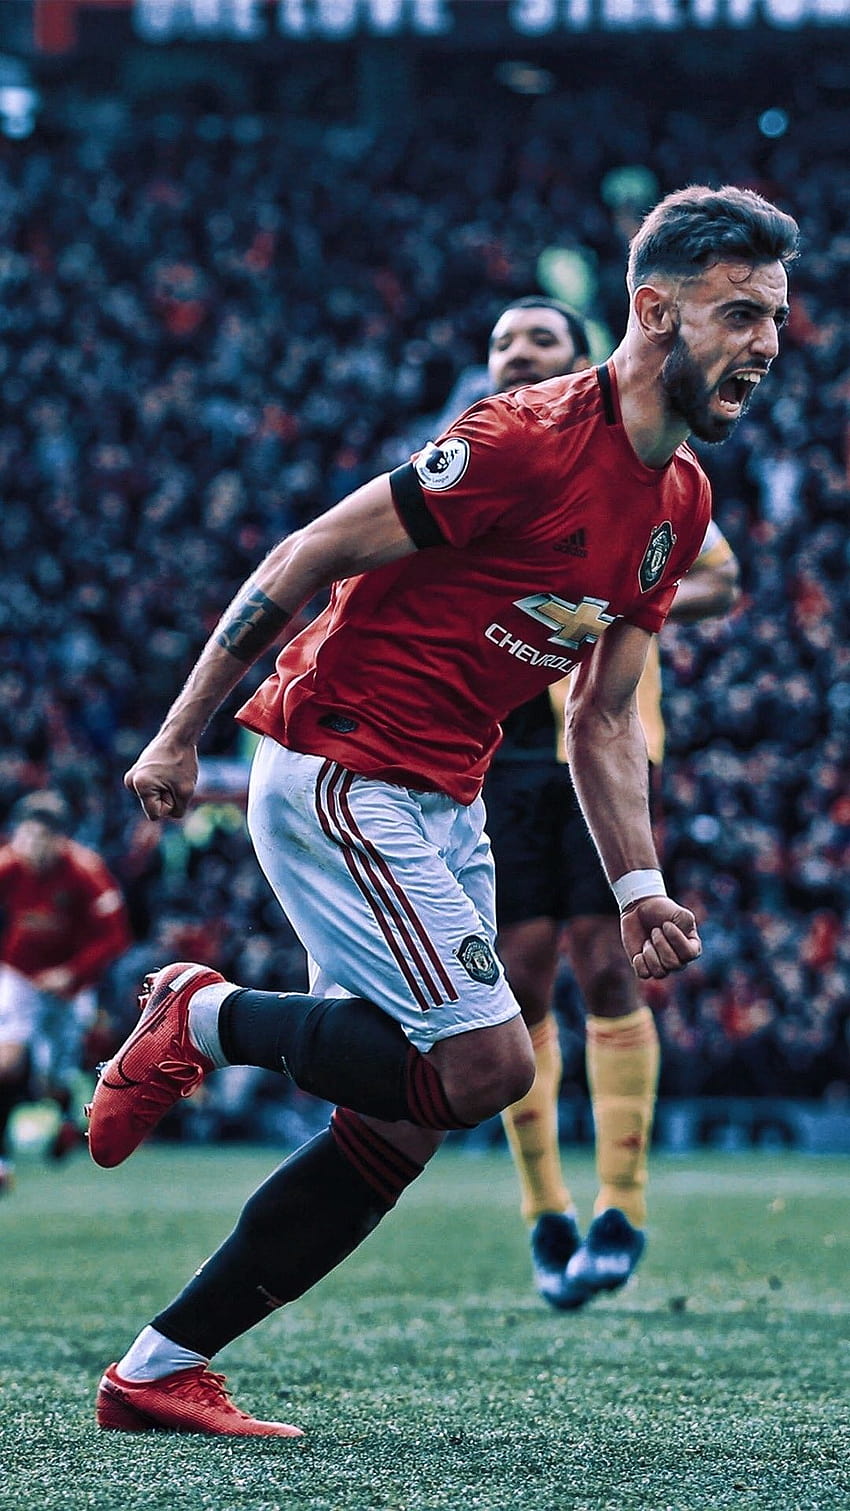 Manchester United in 2020, bruno fernandes iphone HD phone wallpaper